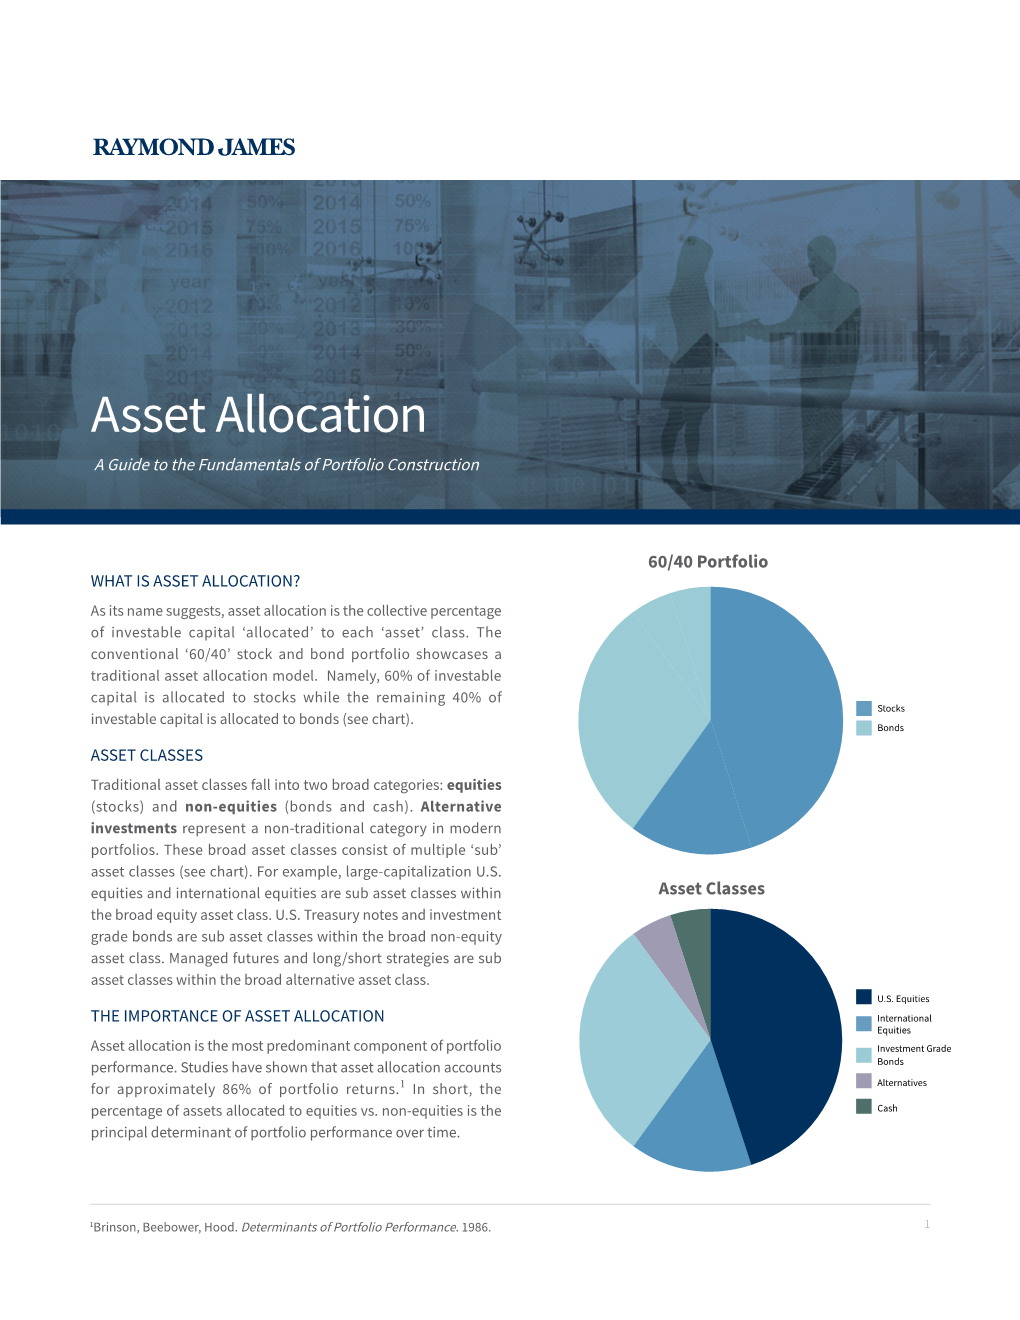 Markets & Investing Asset Allocation